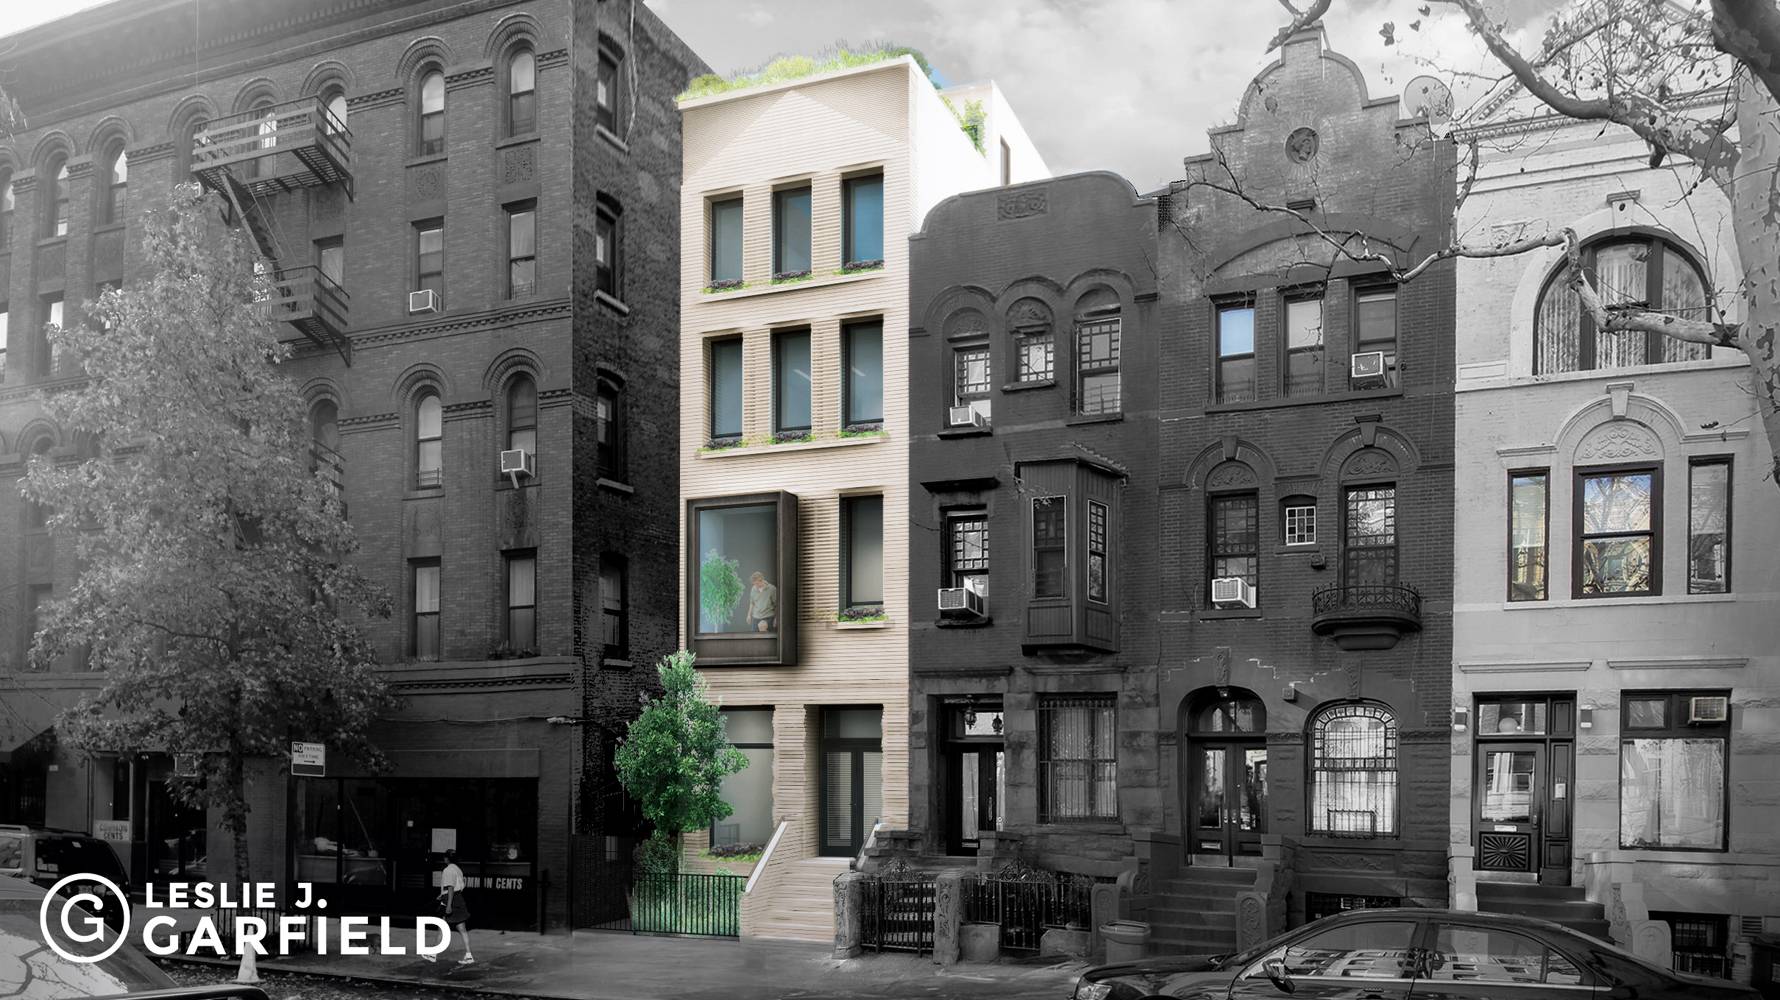 Located on one of the most picturesque, townhouse blocks on the Upper West Side, 110 West 88th Street presents a rare opportunity to build a fully permitted, new construction, and ...